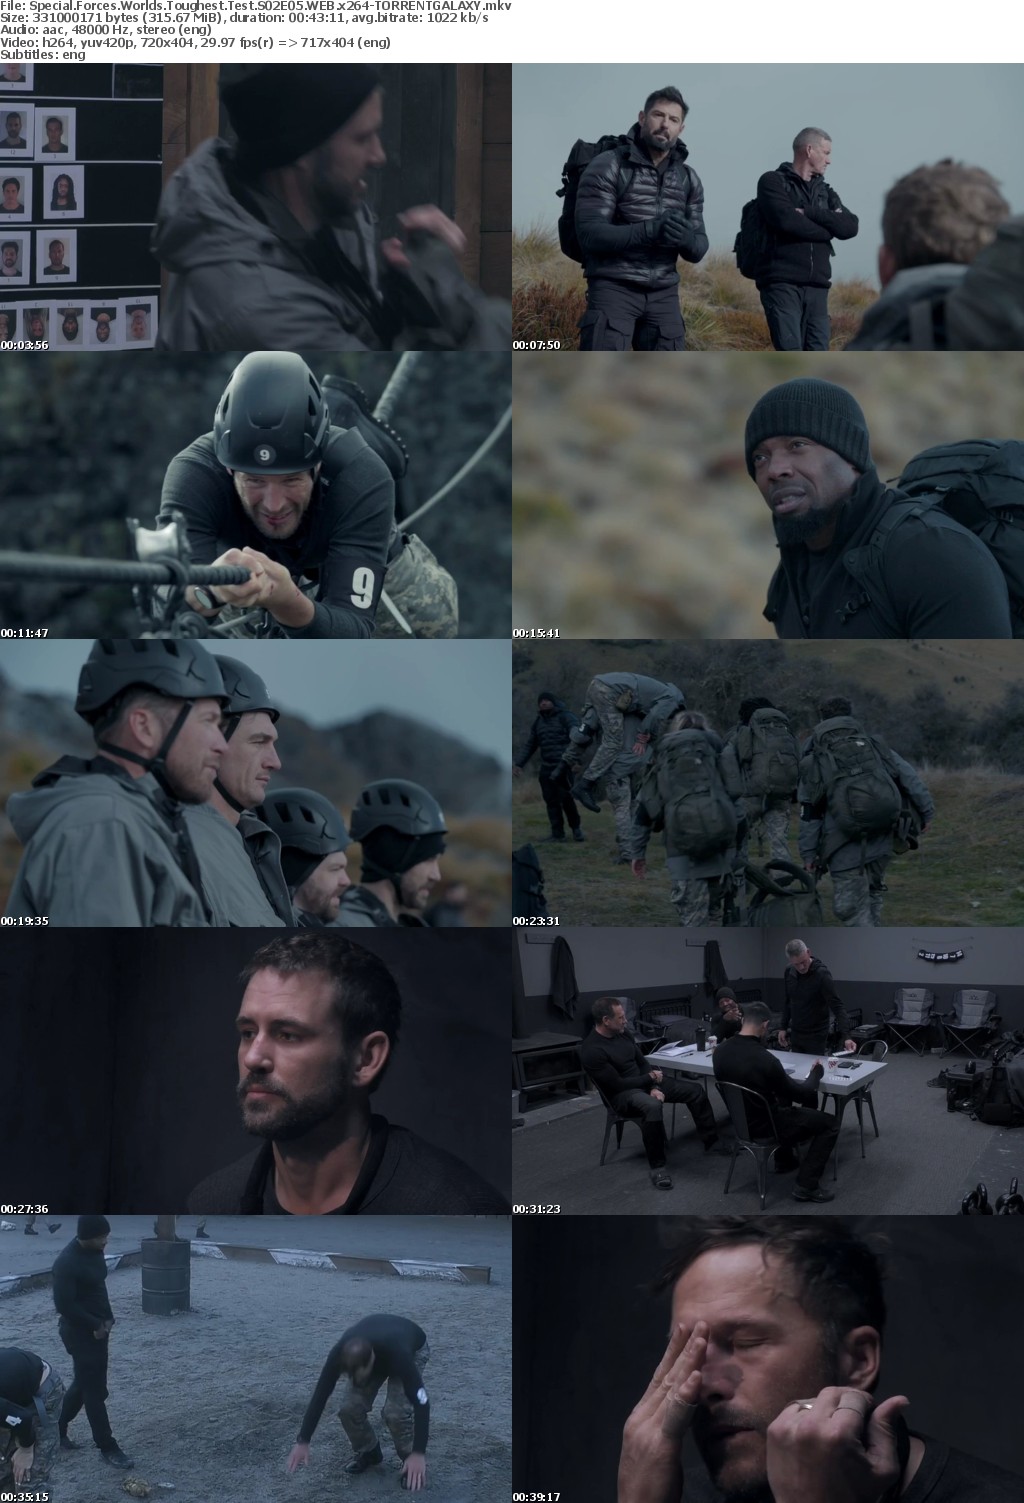 Special Forces Worlds Toughest Test S02E05 WEB x264-GALAXY